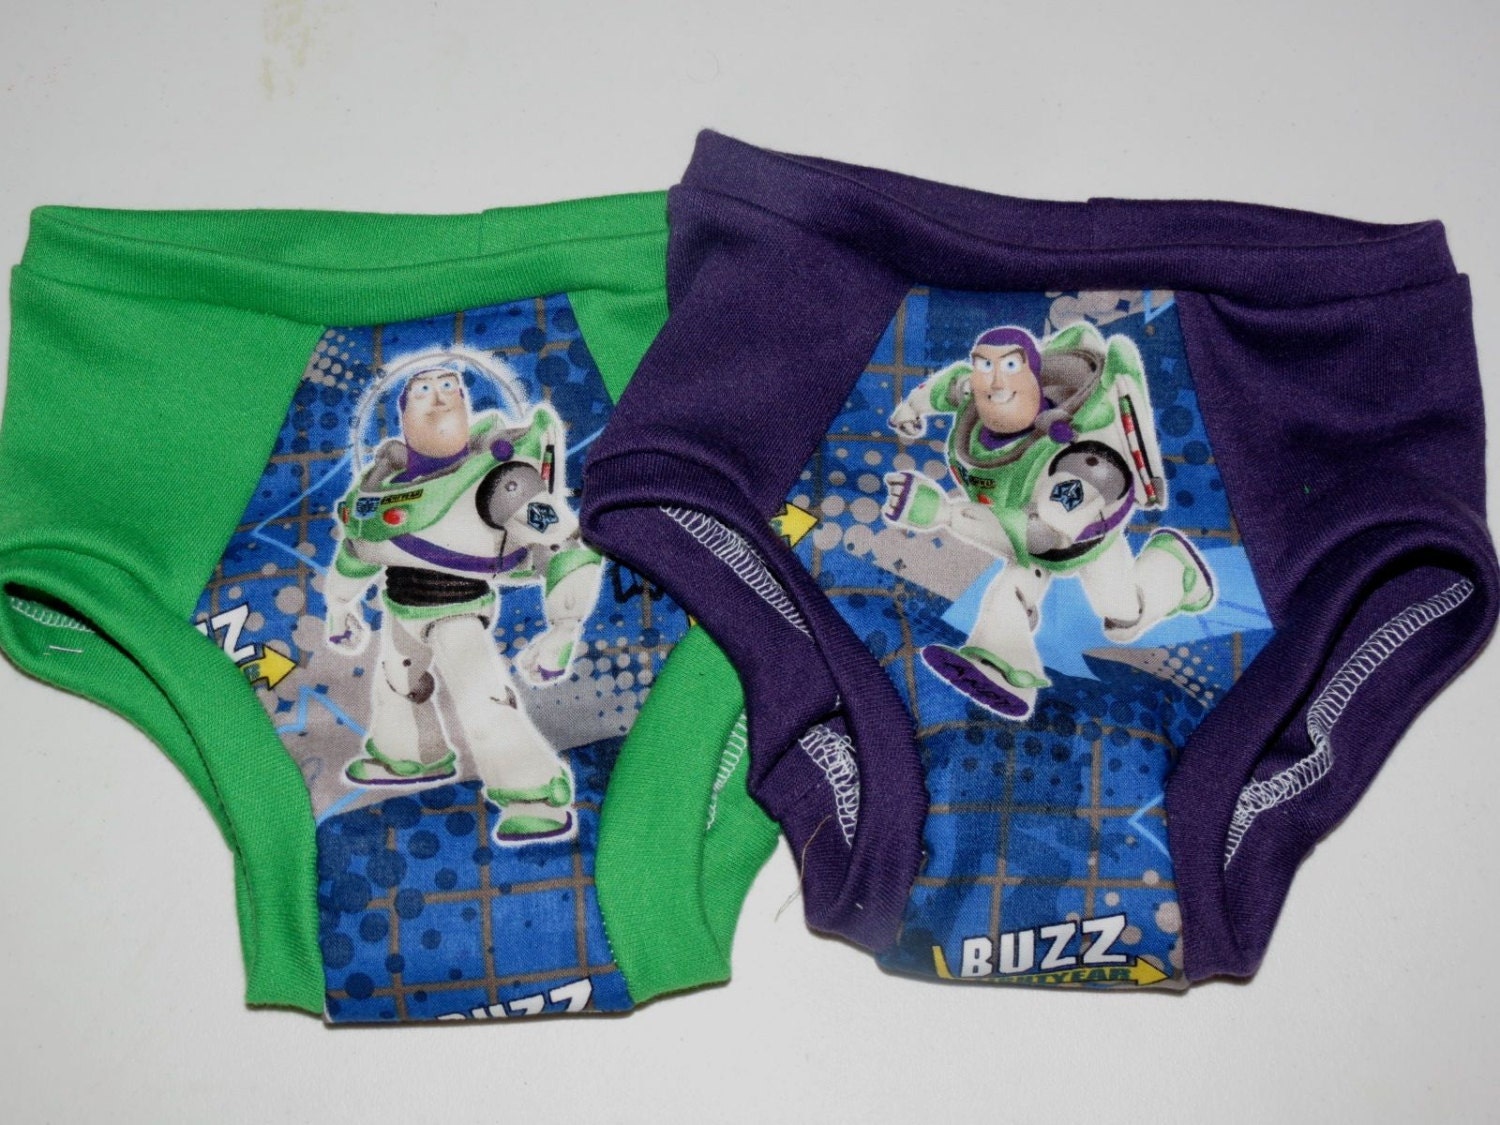 Buzz Lightyear Training Underwear set of two by myfunclothes